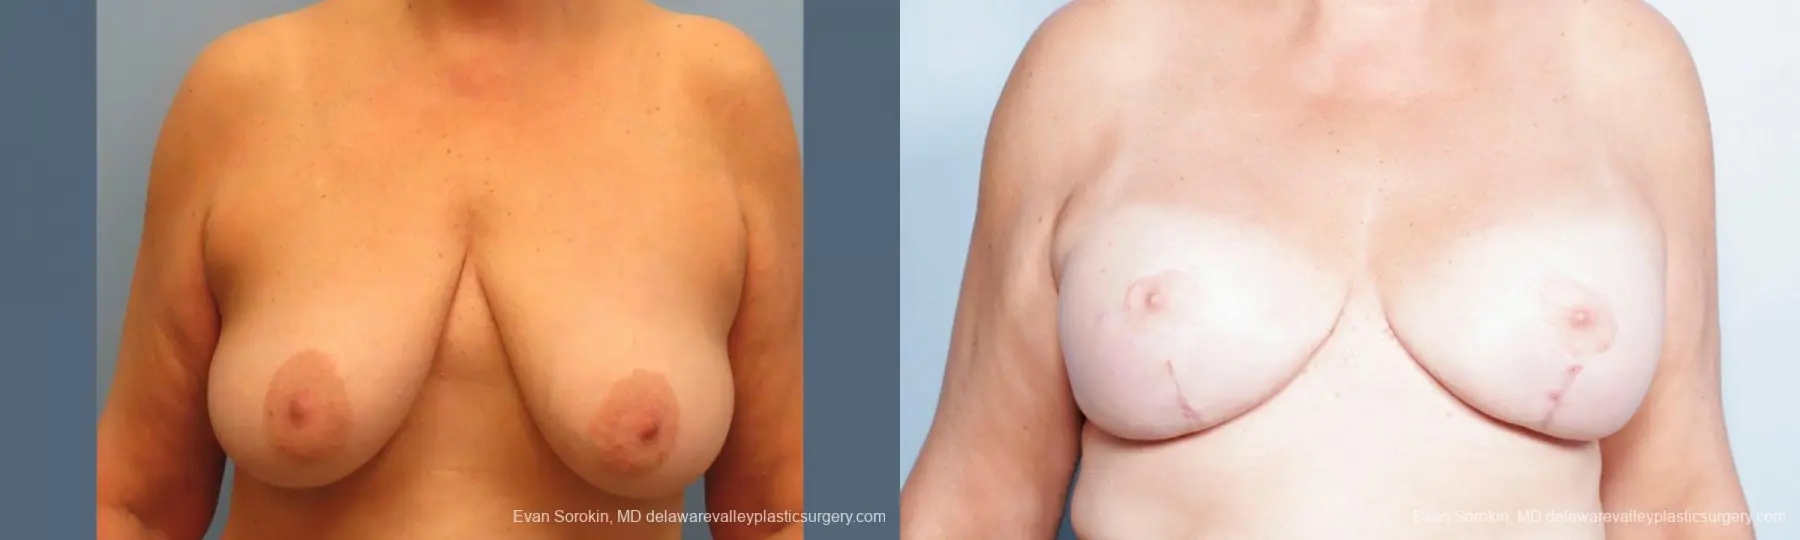 Philadelphia Breast Lift and Augmentation 9431 - Before and After 1